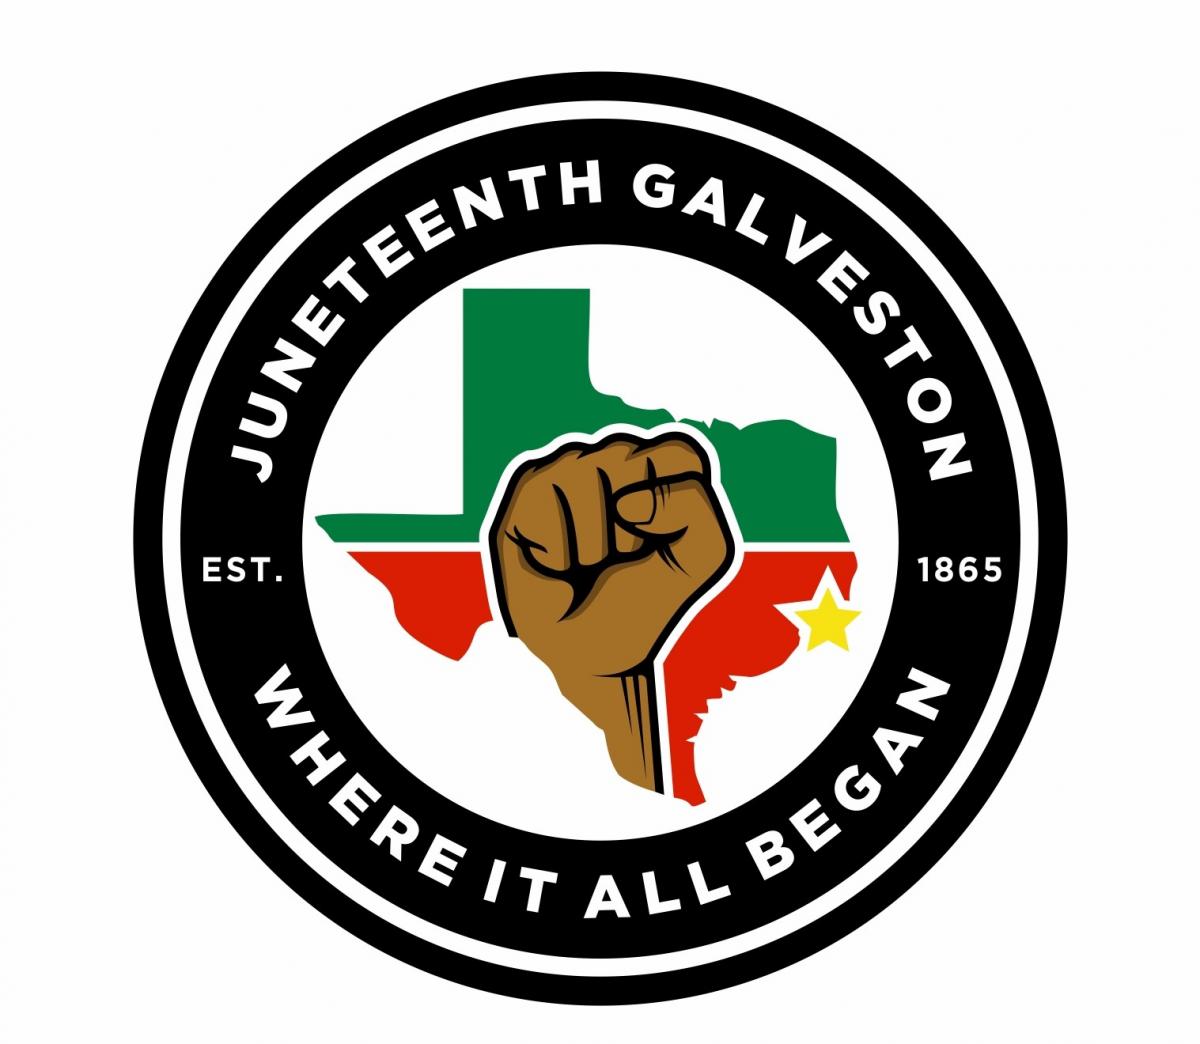 June 2023 CTA Event - "The Story of Juneteenth in Galveston"